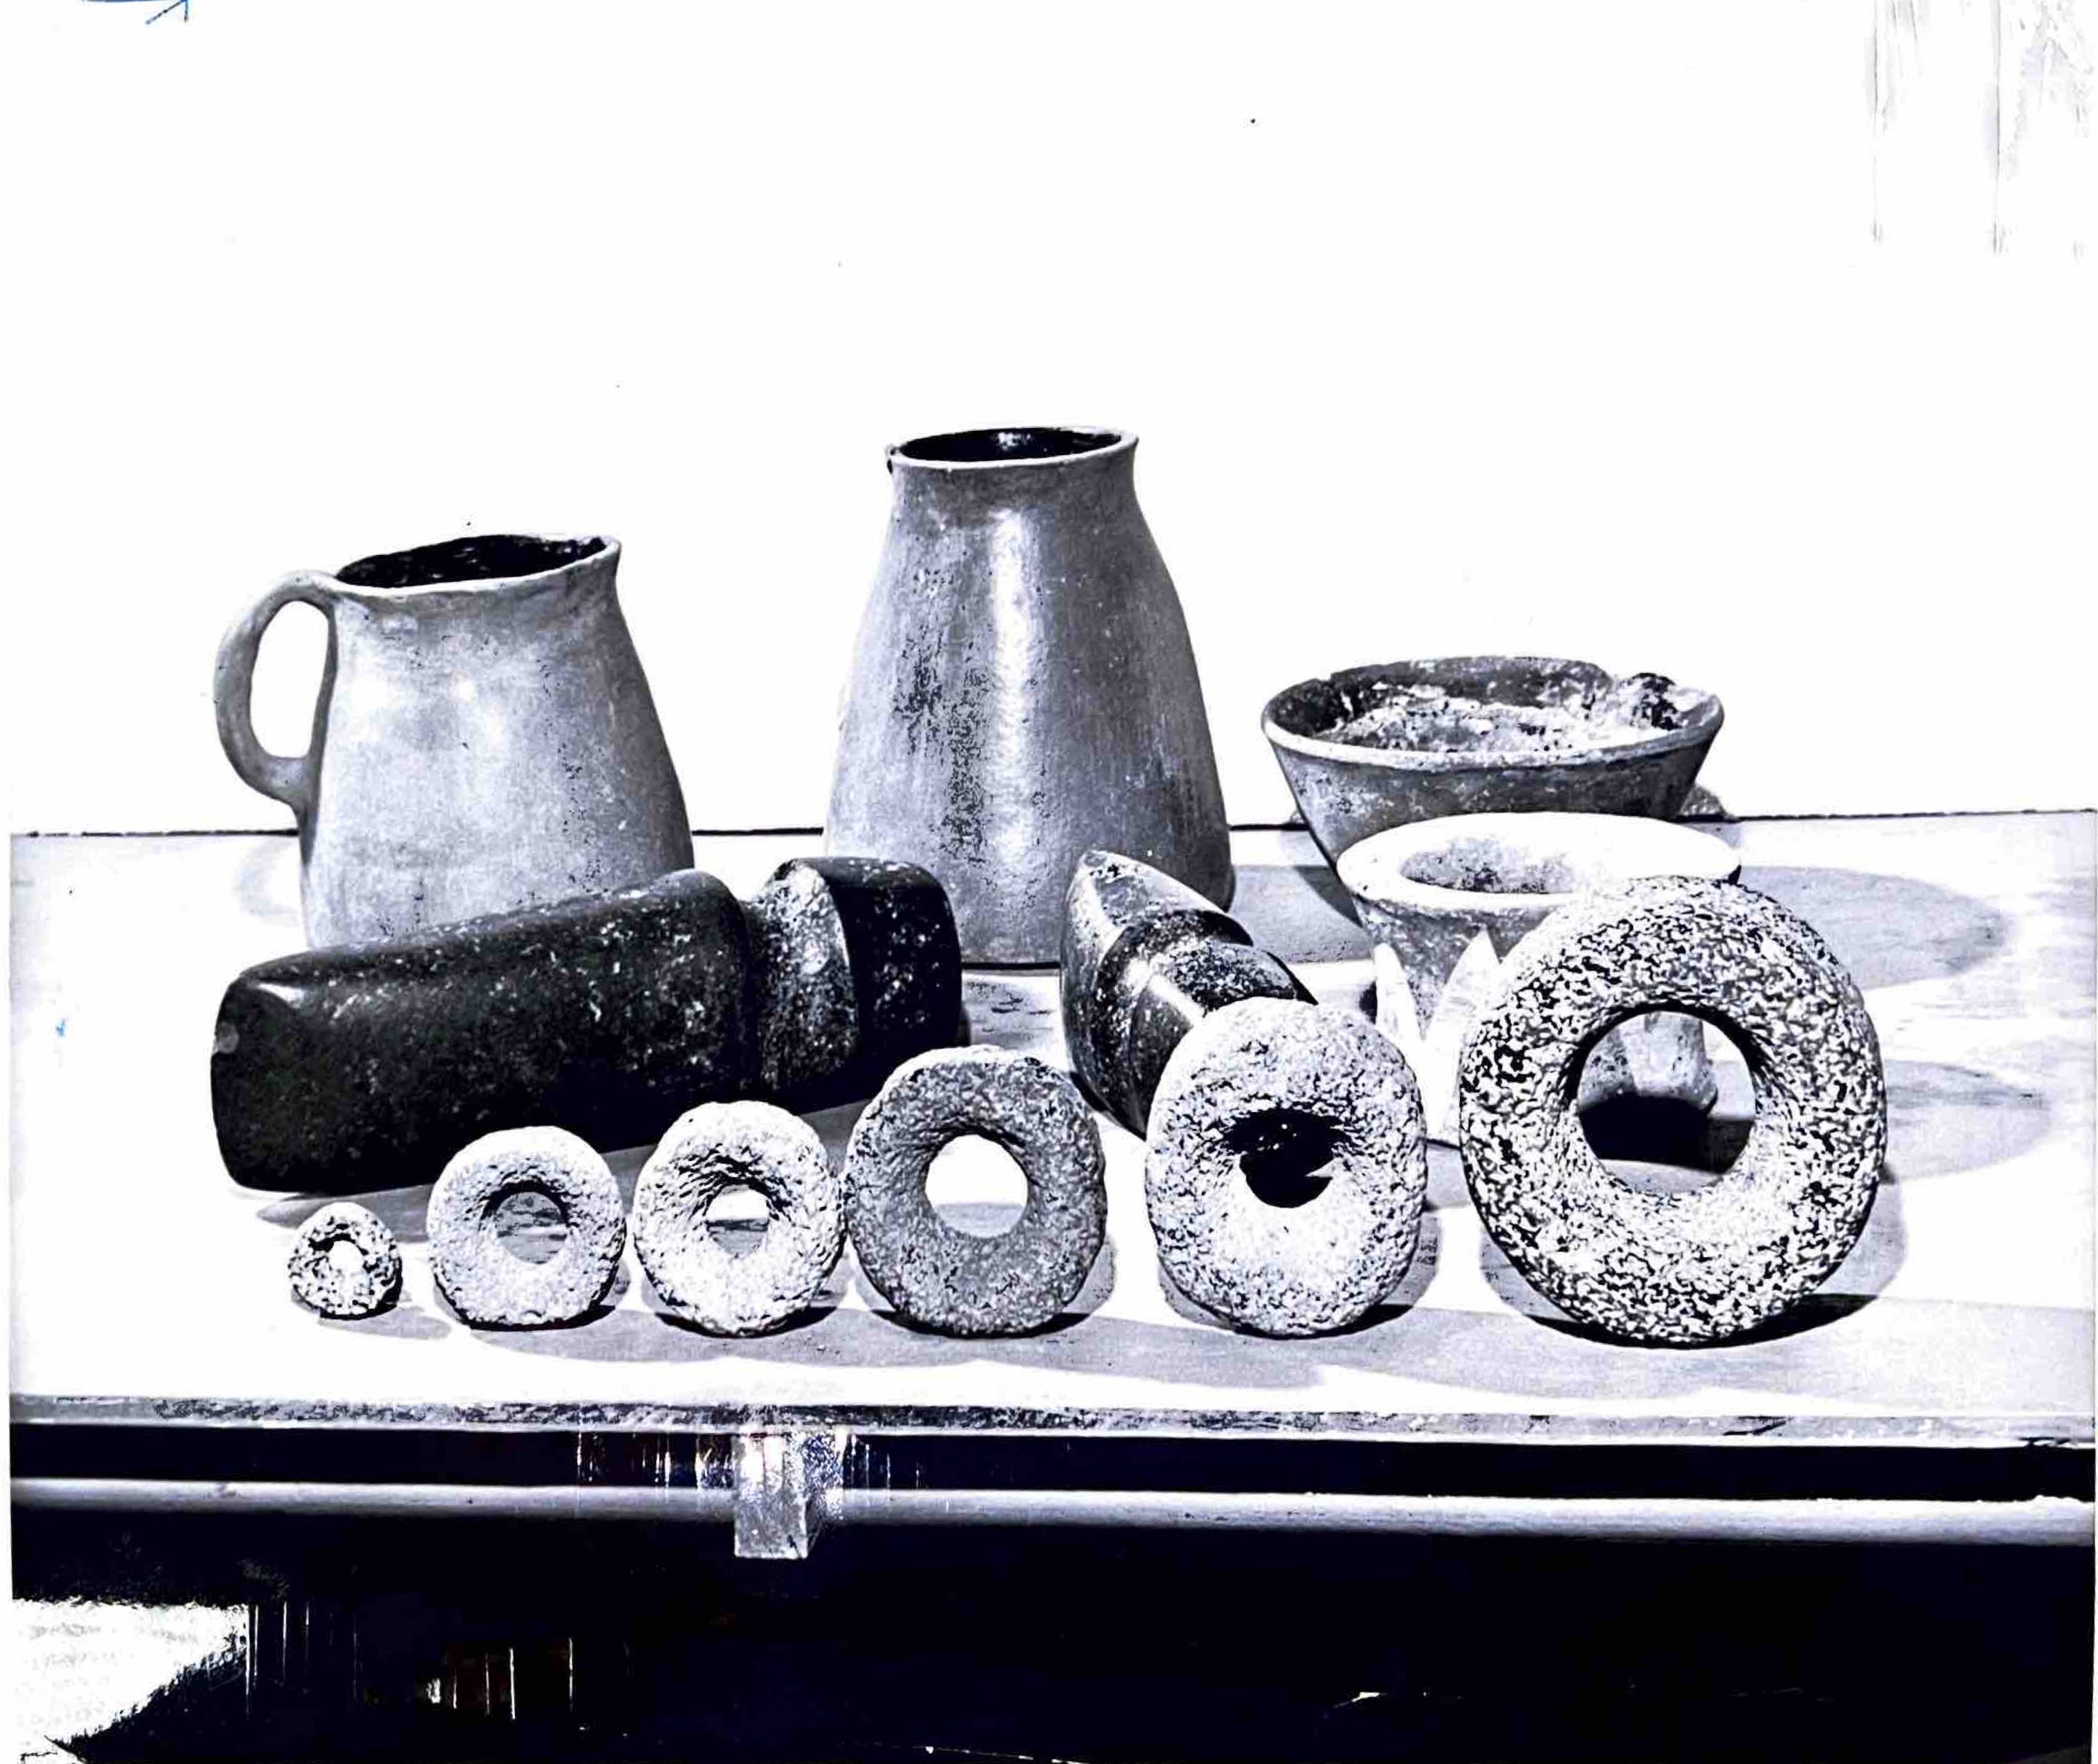 Artifacts on display at the Pueblo Grande Museum, now known as S'edav Va'aki Museum, in January 1964.